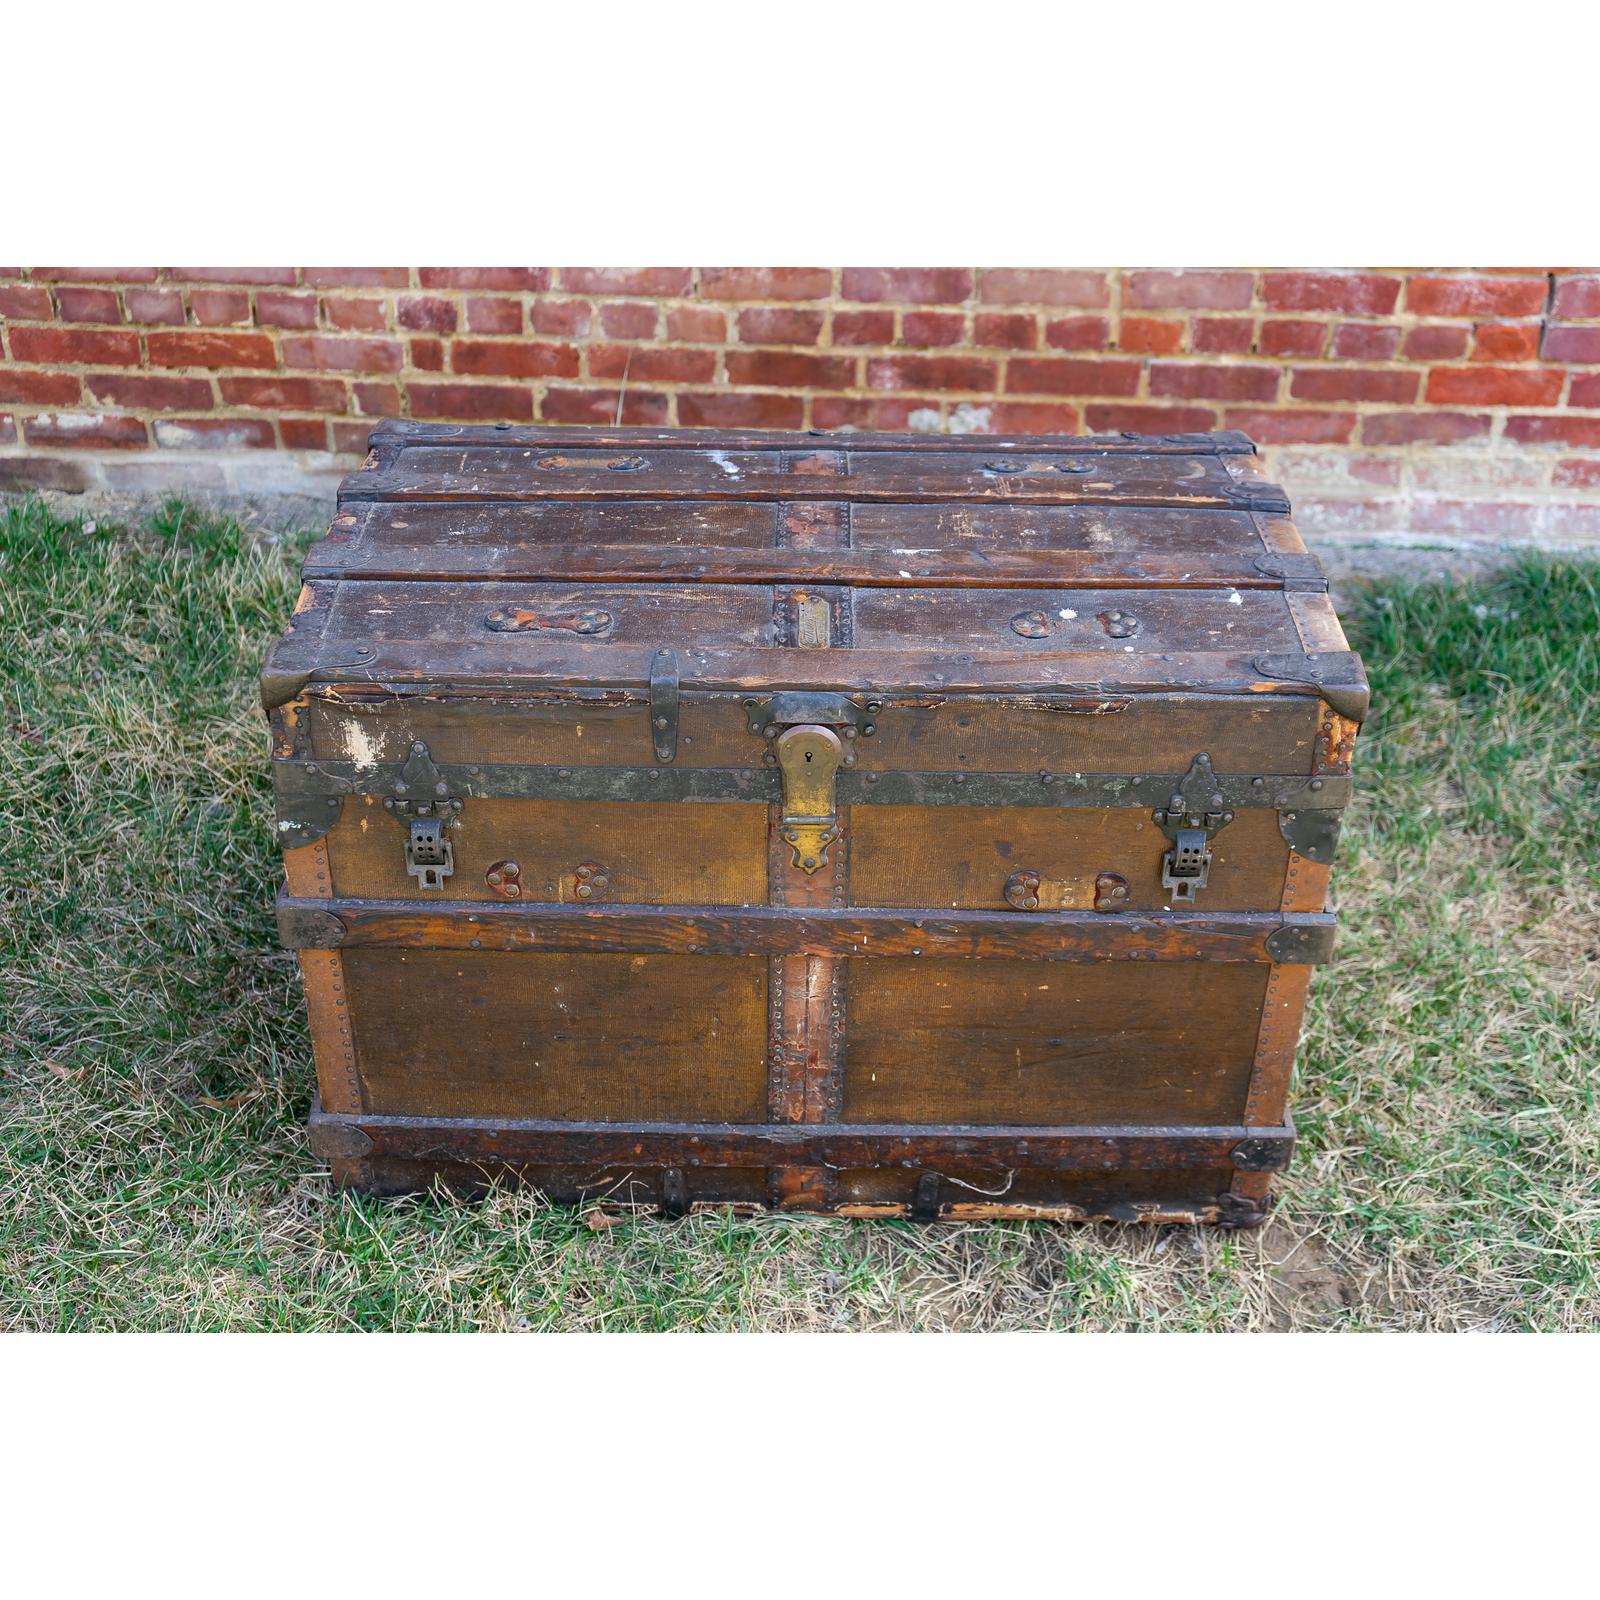 Sold at Auction: Antique Wood & Metal Steamer Trunk